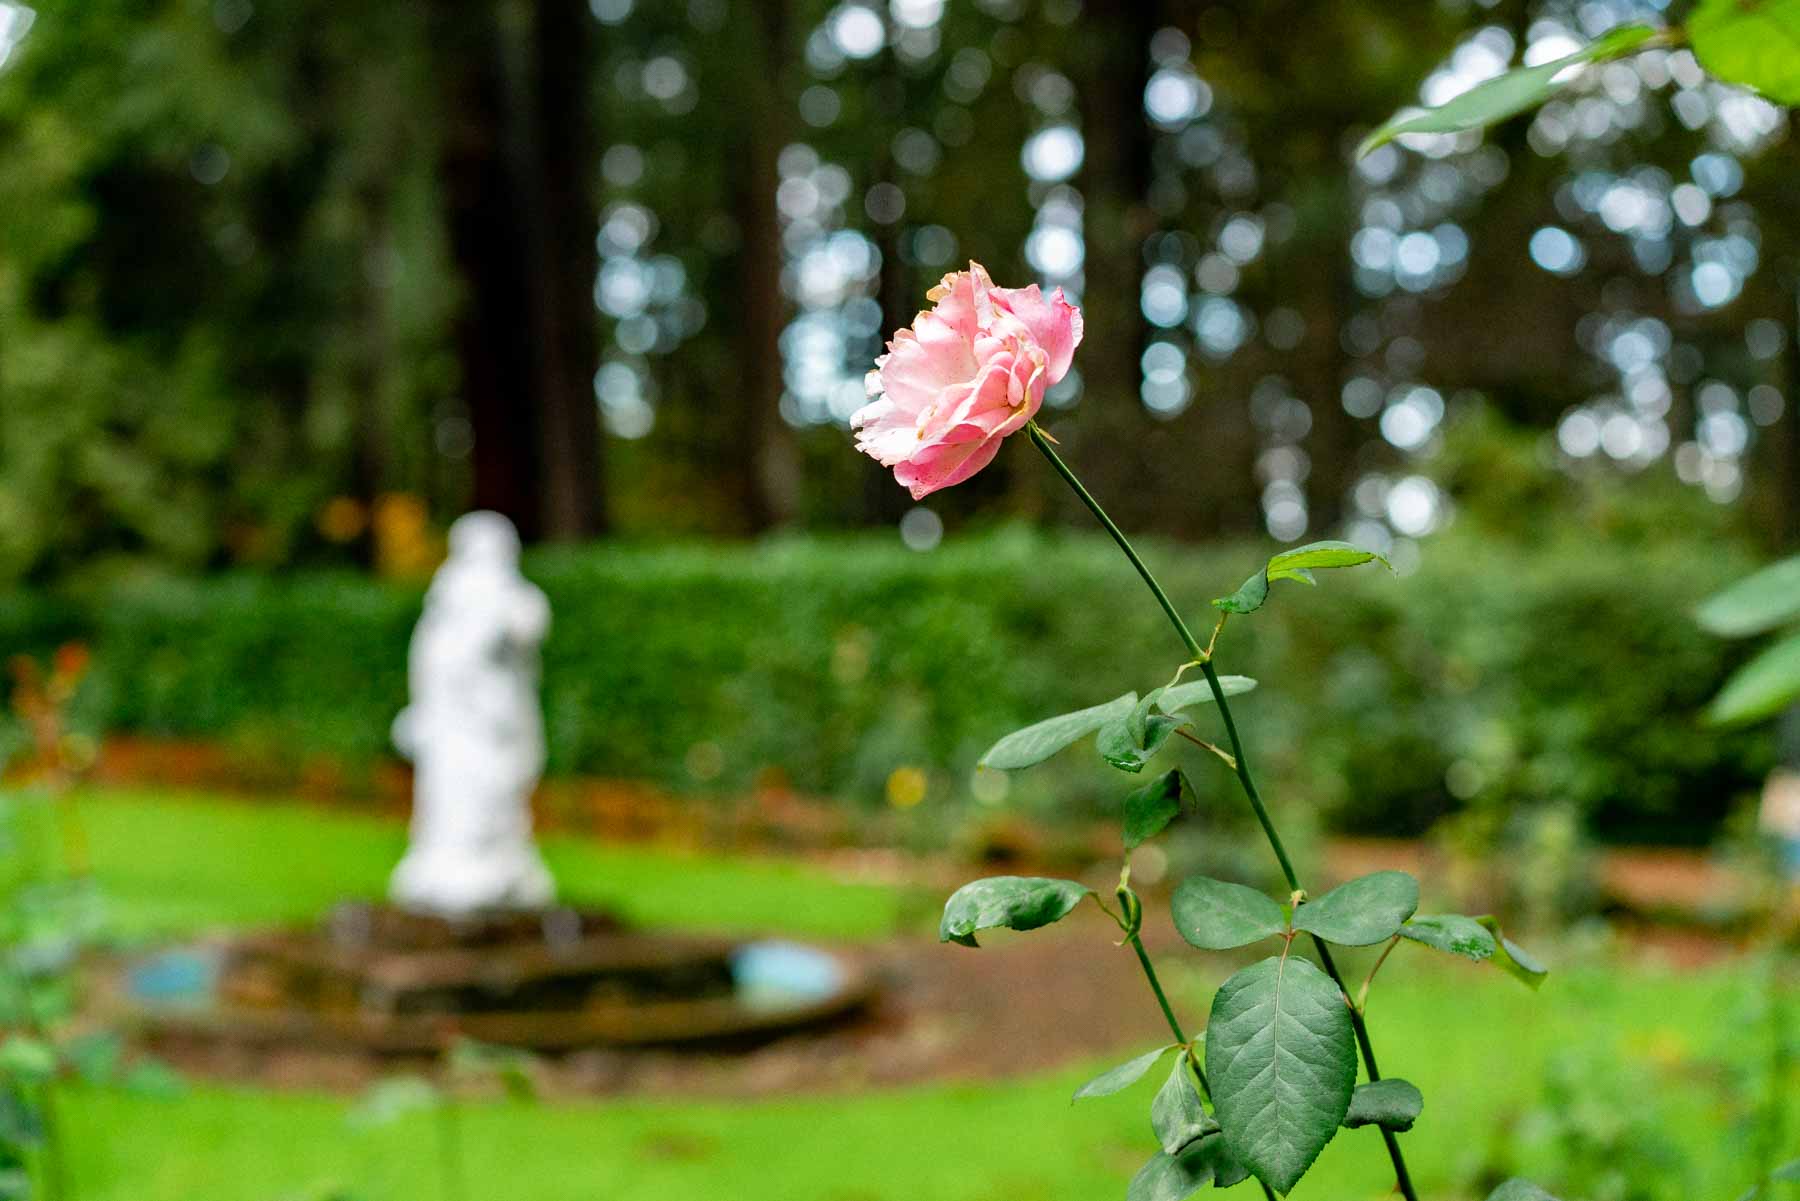 The rose garden at The Grotto in Portland